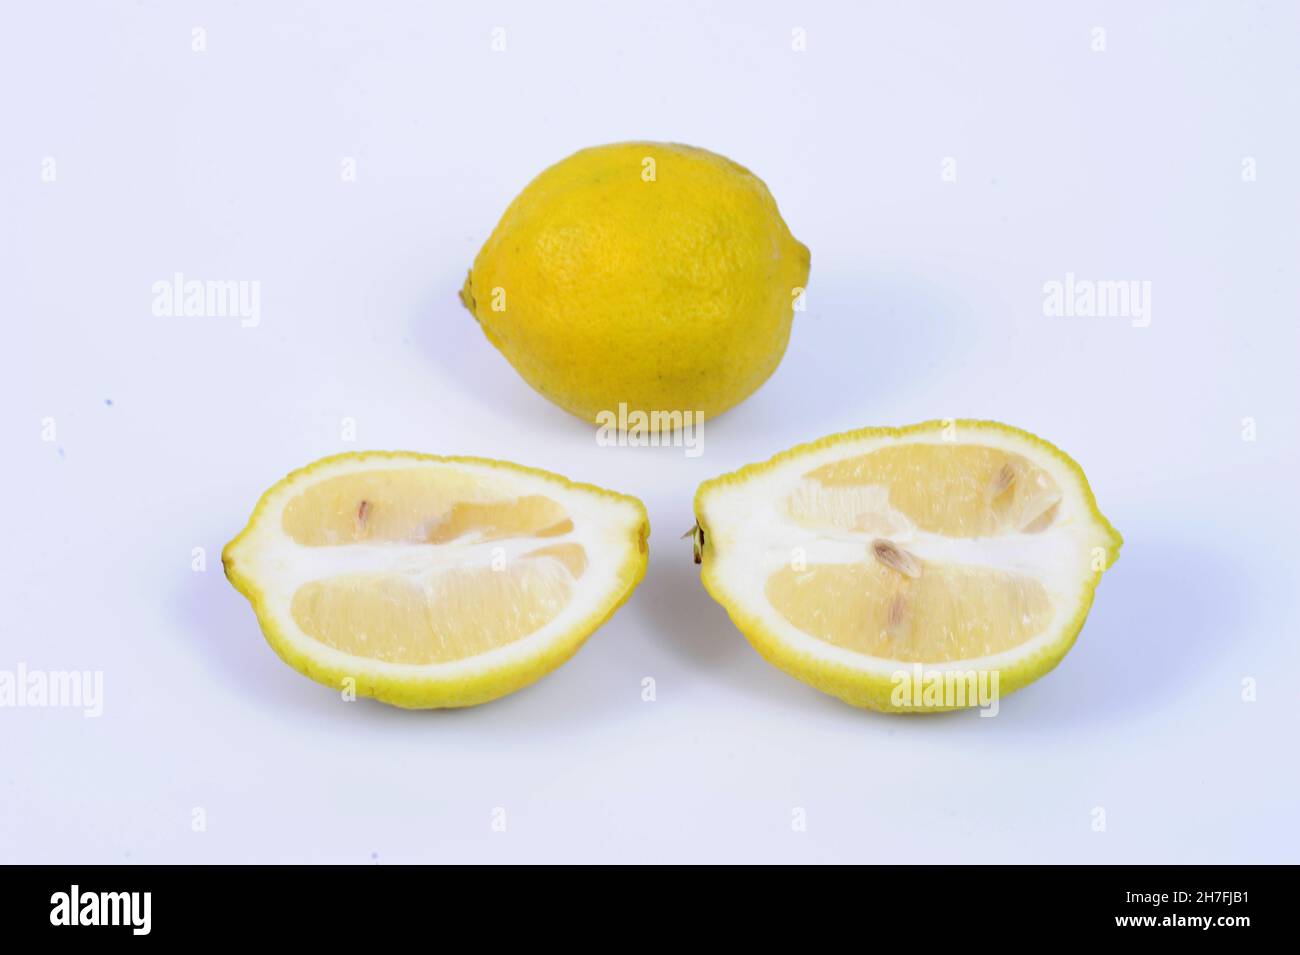 The lemon, Citrus limon, is a species of small evergreen tree in the flowering plant family Rutaceae, native to South Asia, primarily Northeast India. Stock Photo